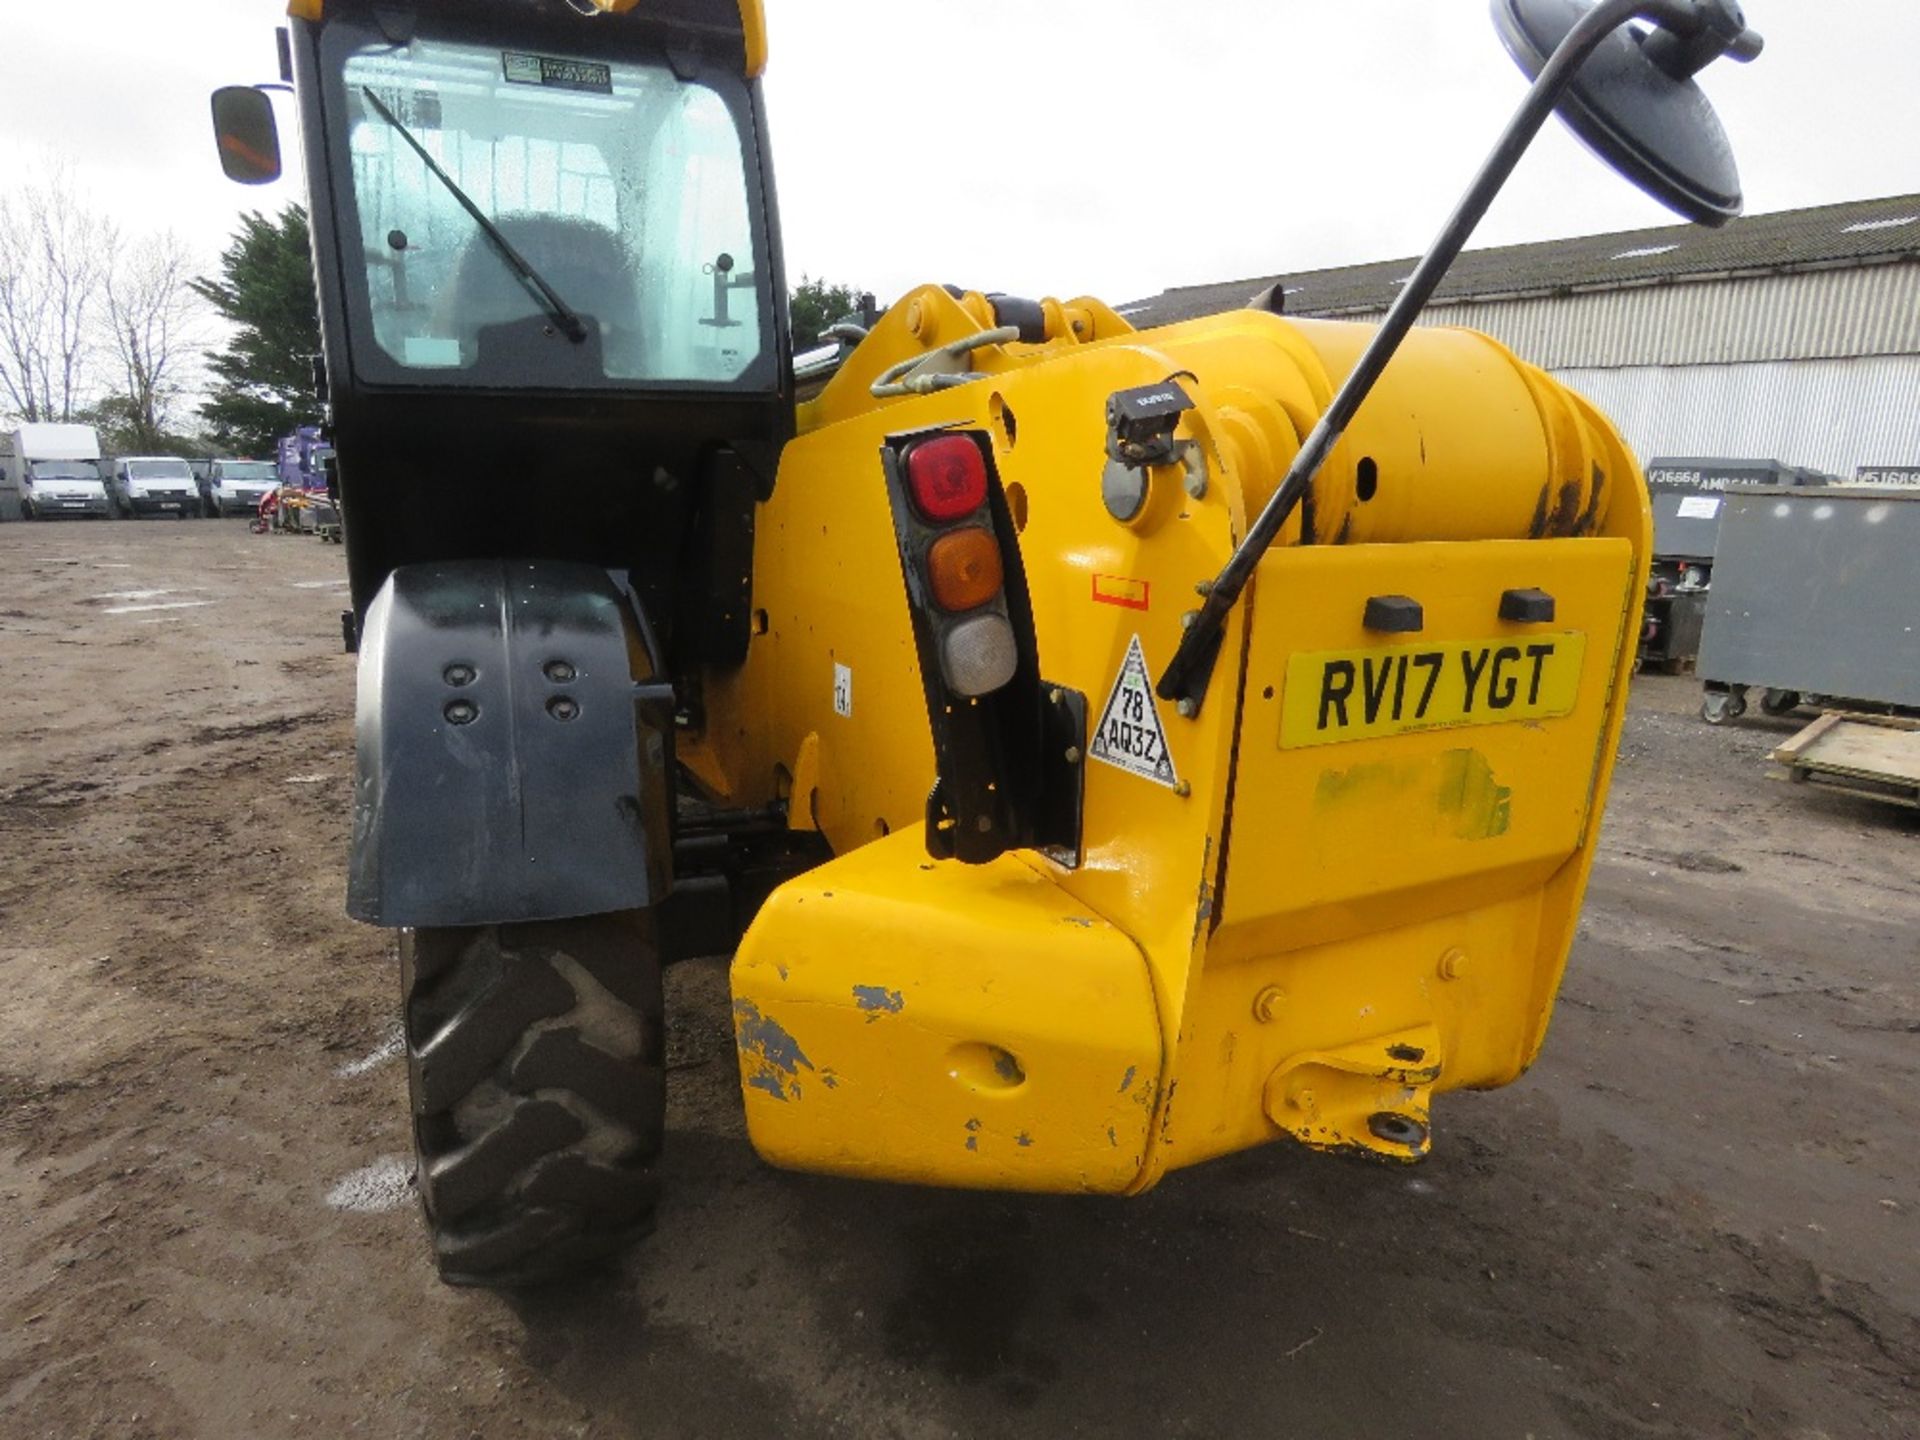 JCB 540-140 TELEHANDLER REG:RV17 YGT WITH V5. 14METRE REACH, 4 TONNE LIFT, 9676 REC HOURS. OWNED FRO - Image 7 of 14